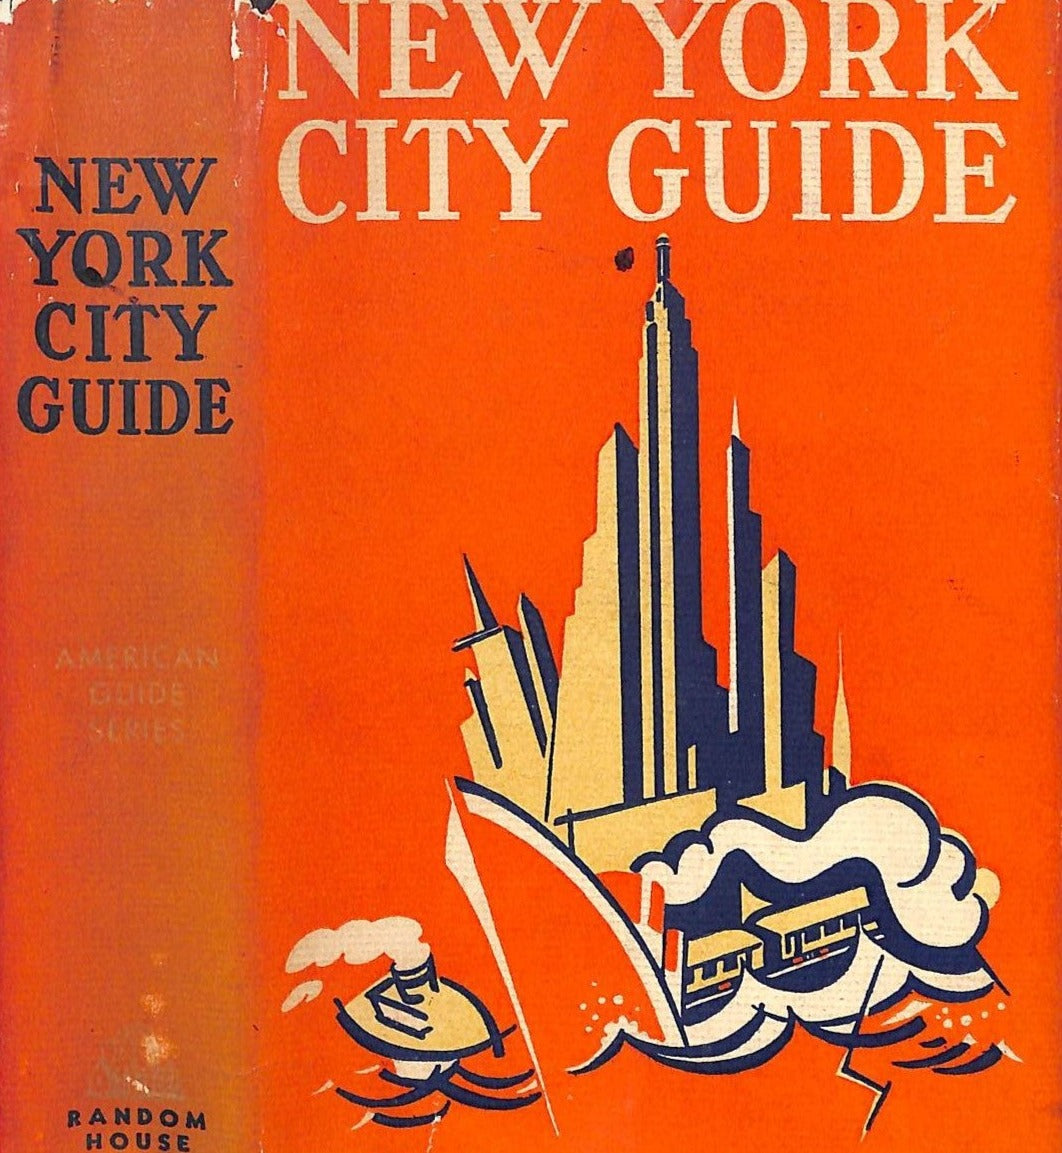 New York City Guide Federal Writers' Project